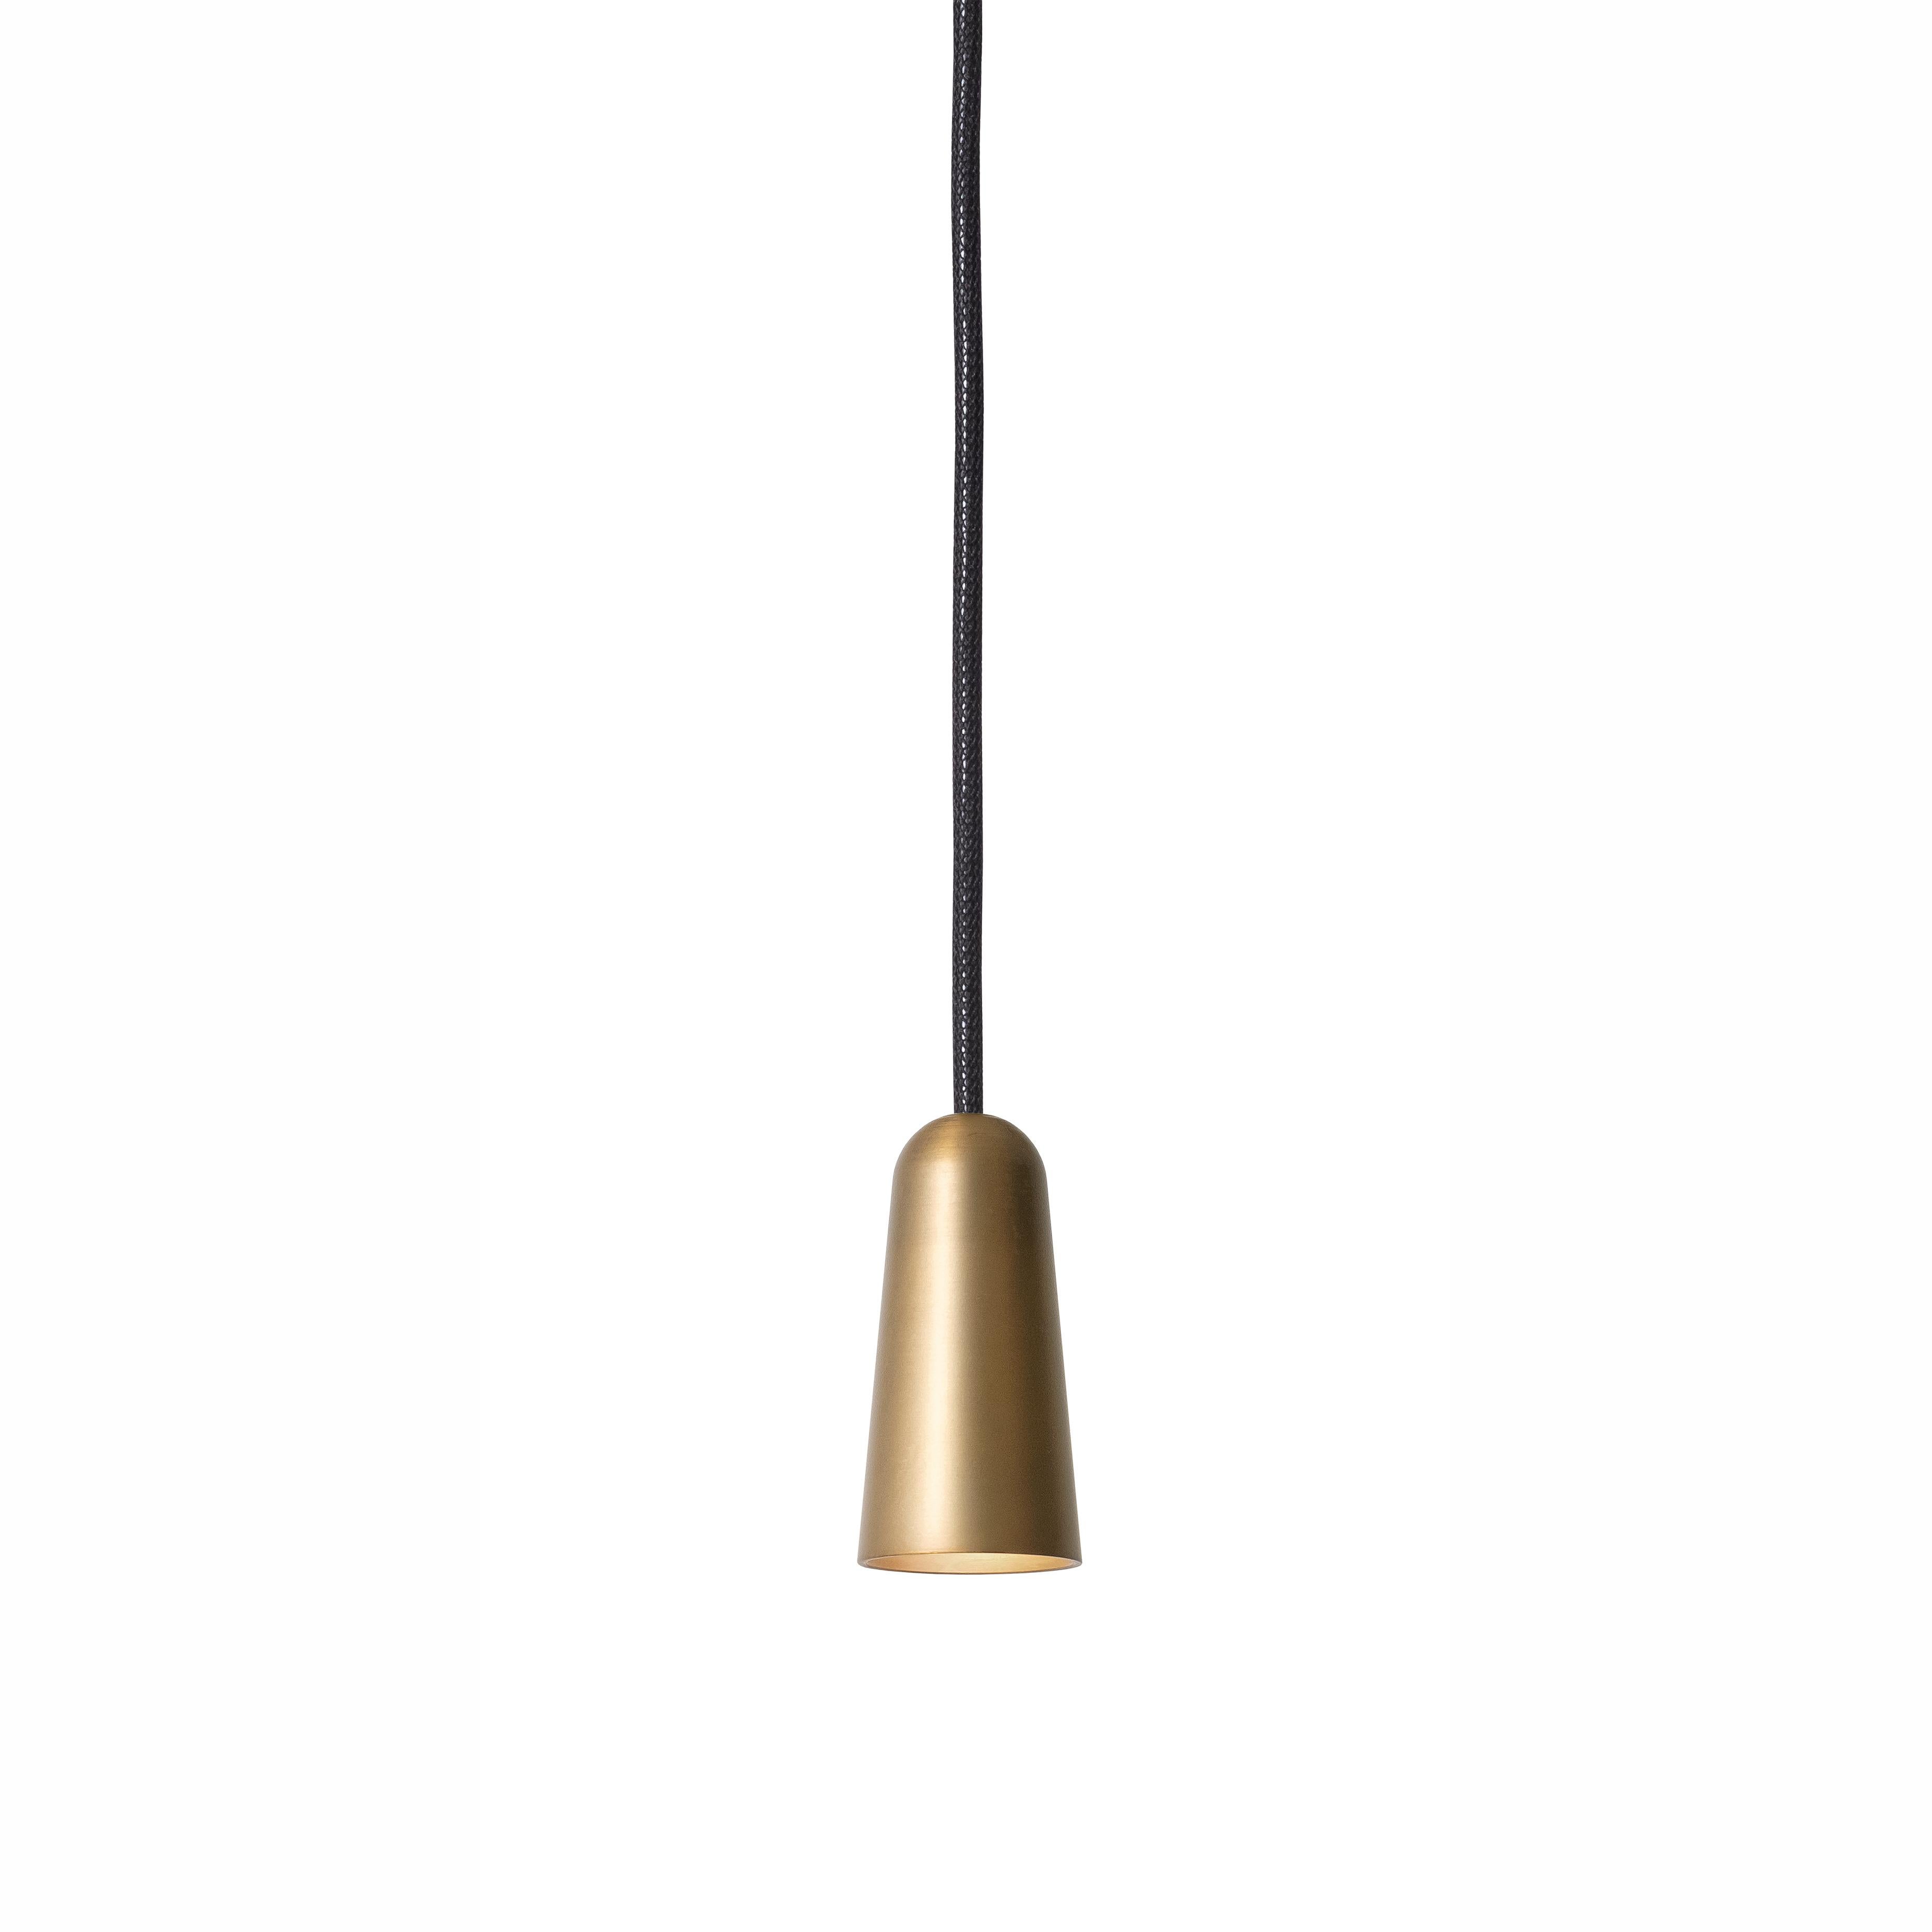 Ceiling lamp model 3493-6 Massiv Lamp by Henrik Tengler and manufactured by Konsthantverk.

The production of lamps, wall lights and floor lamps are manufactured using craftsman’s techniques with the same materials and techniques as the first